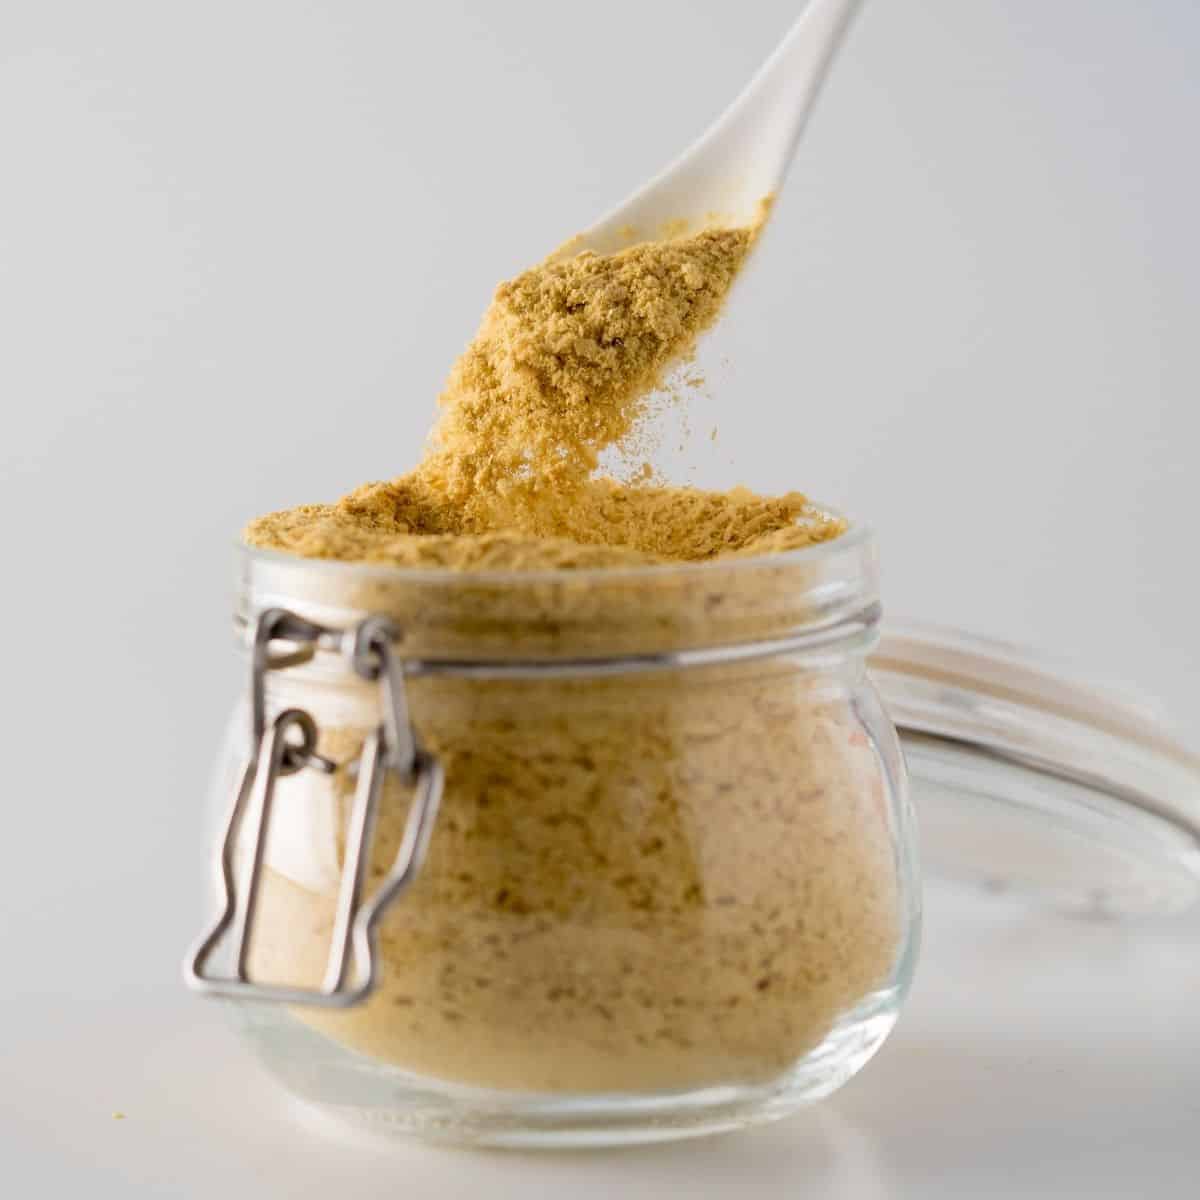 Spoon scooping nutritional yeast out of a glass jar